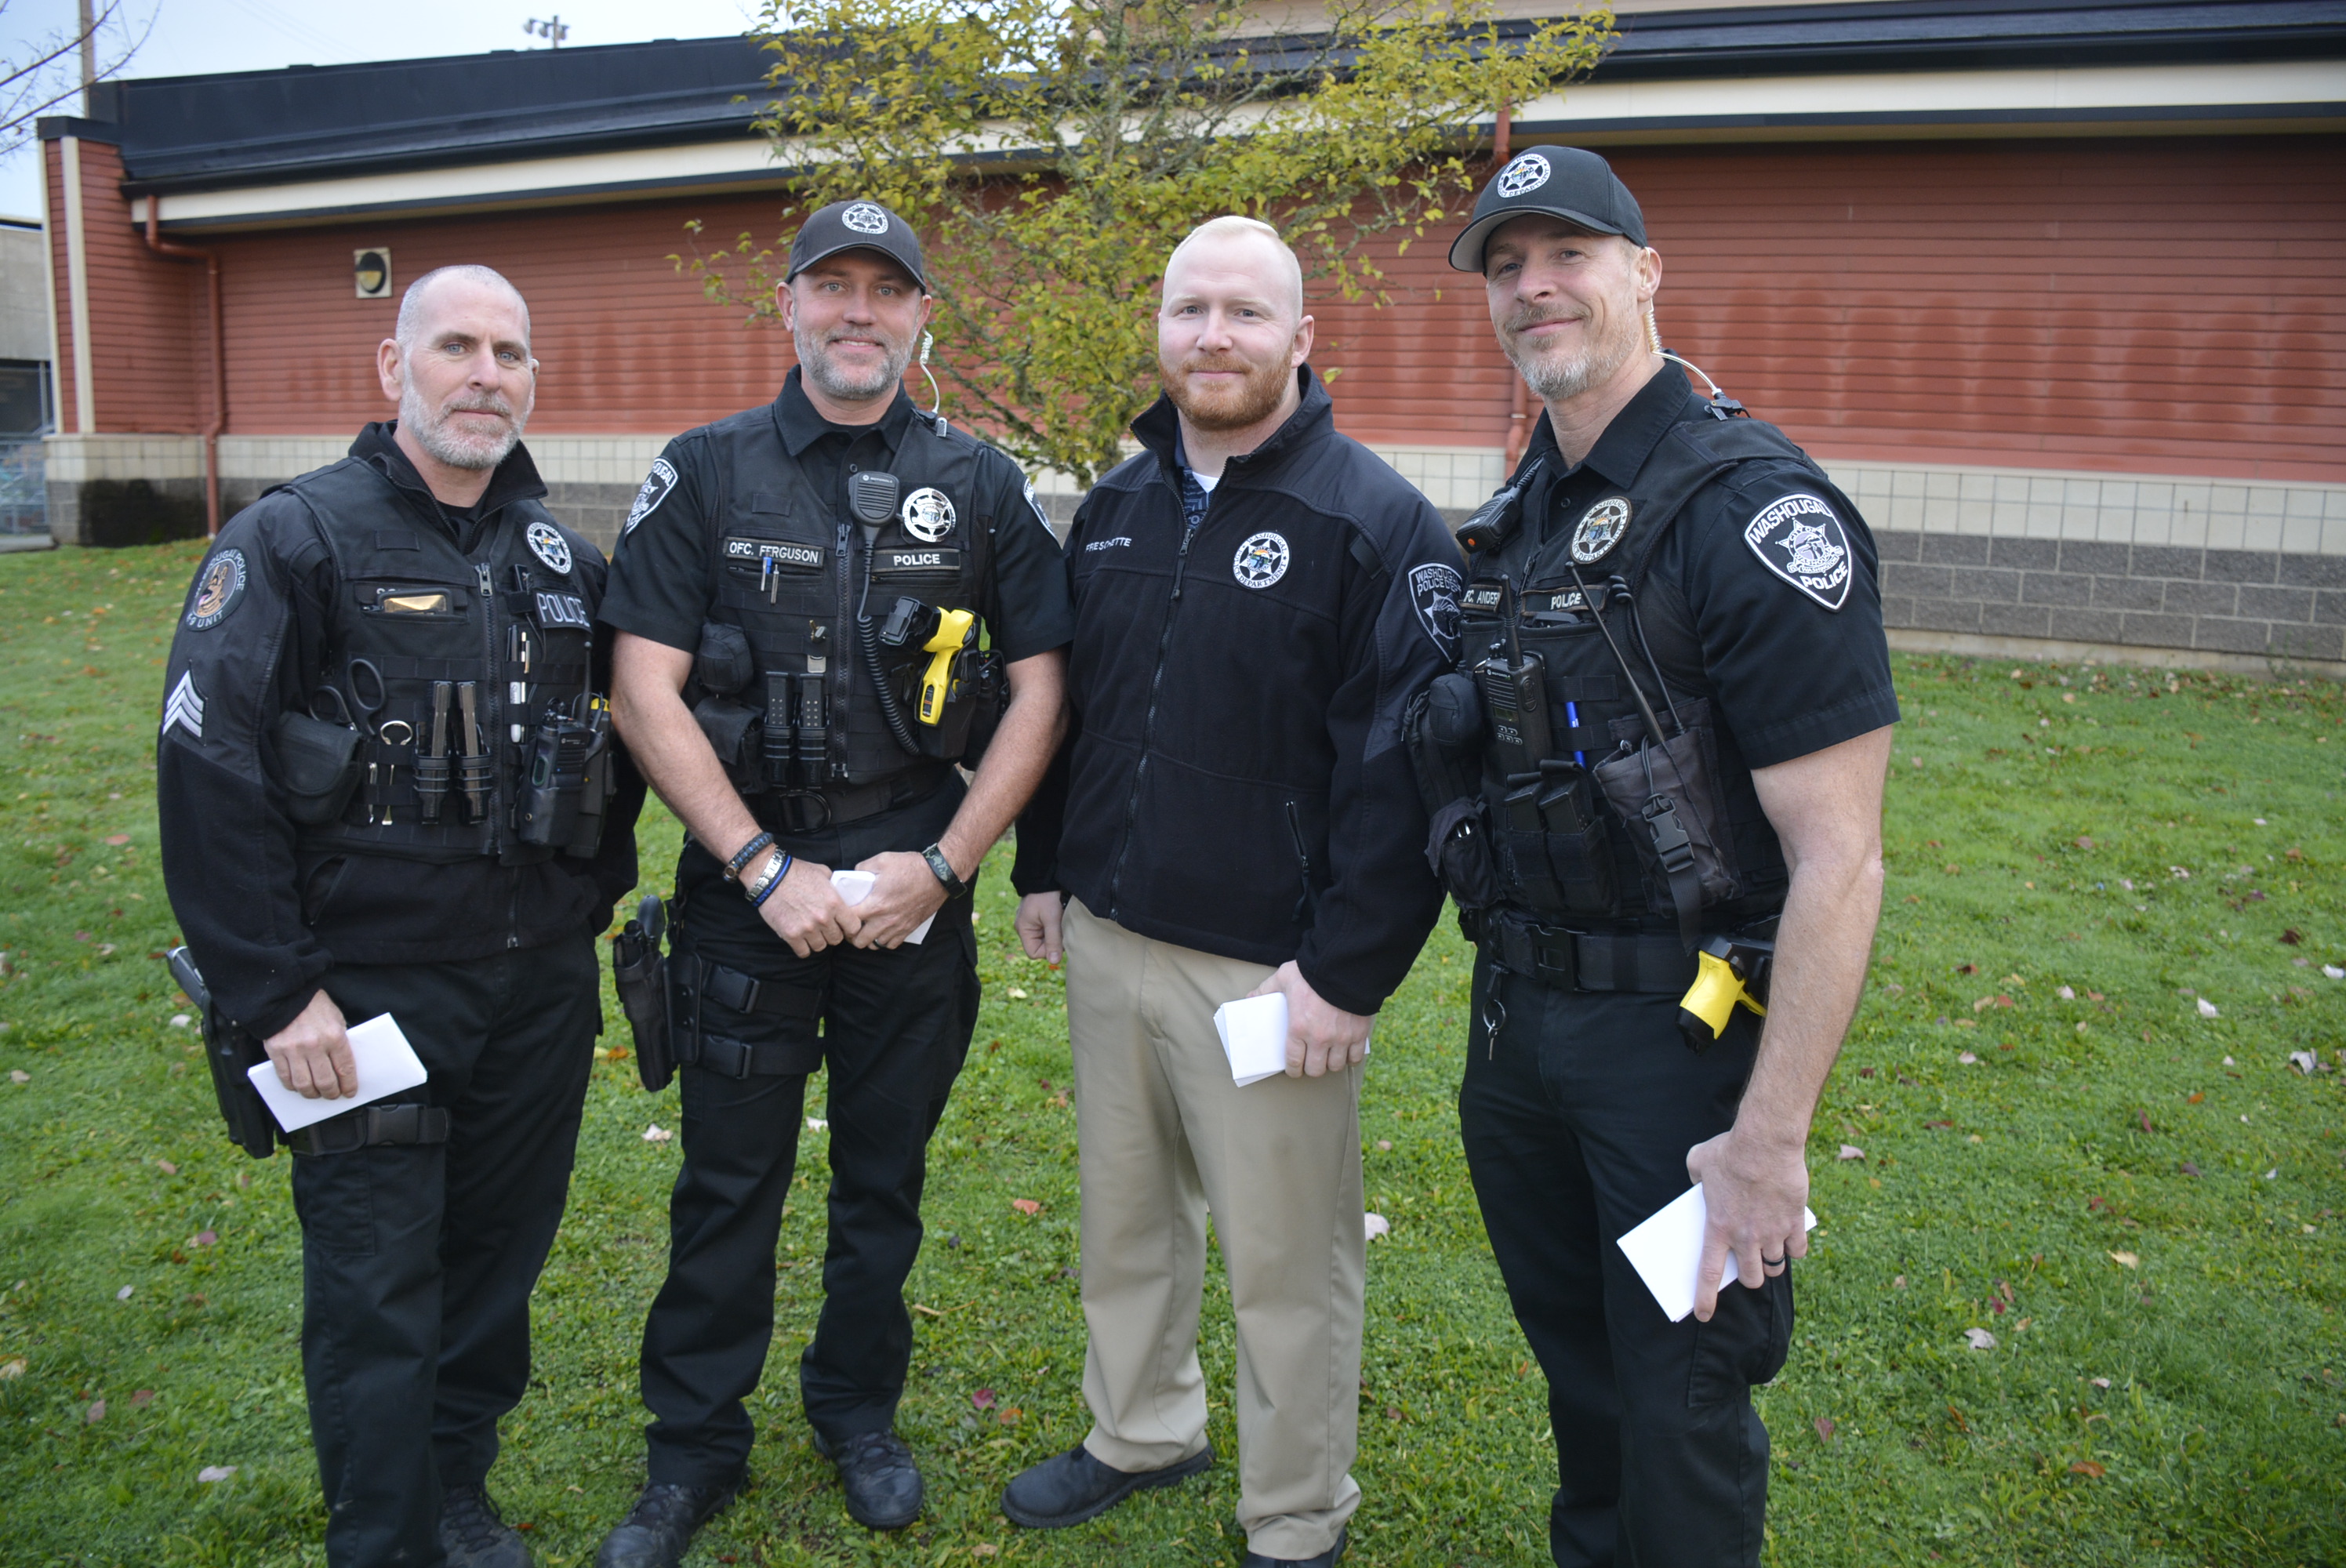 Four members of the Washougal Police Department standing near the school